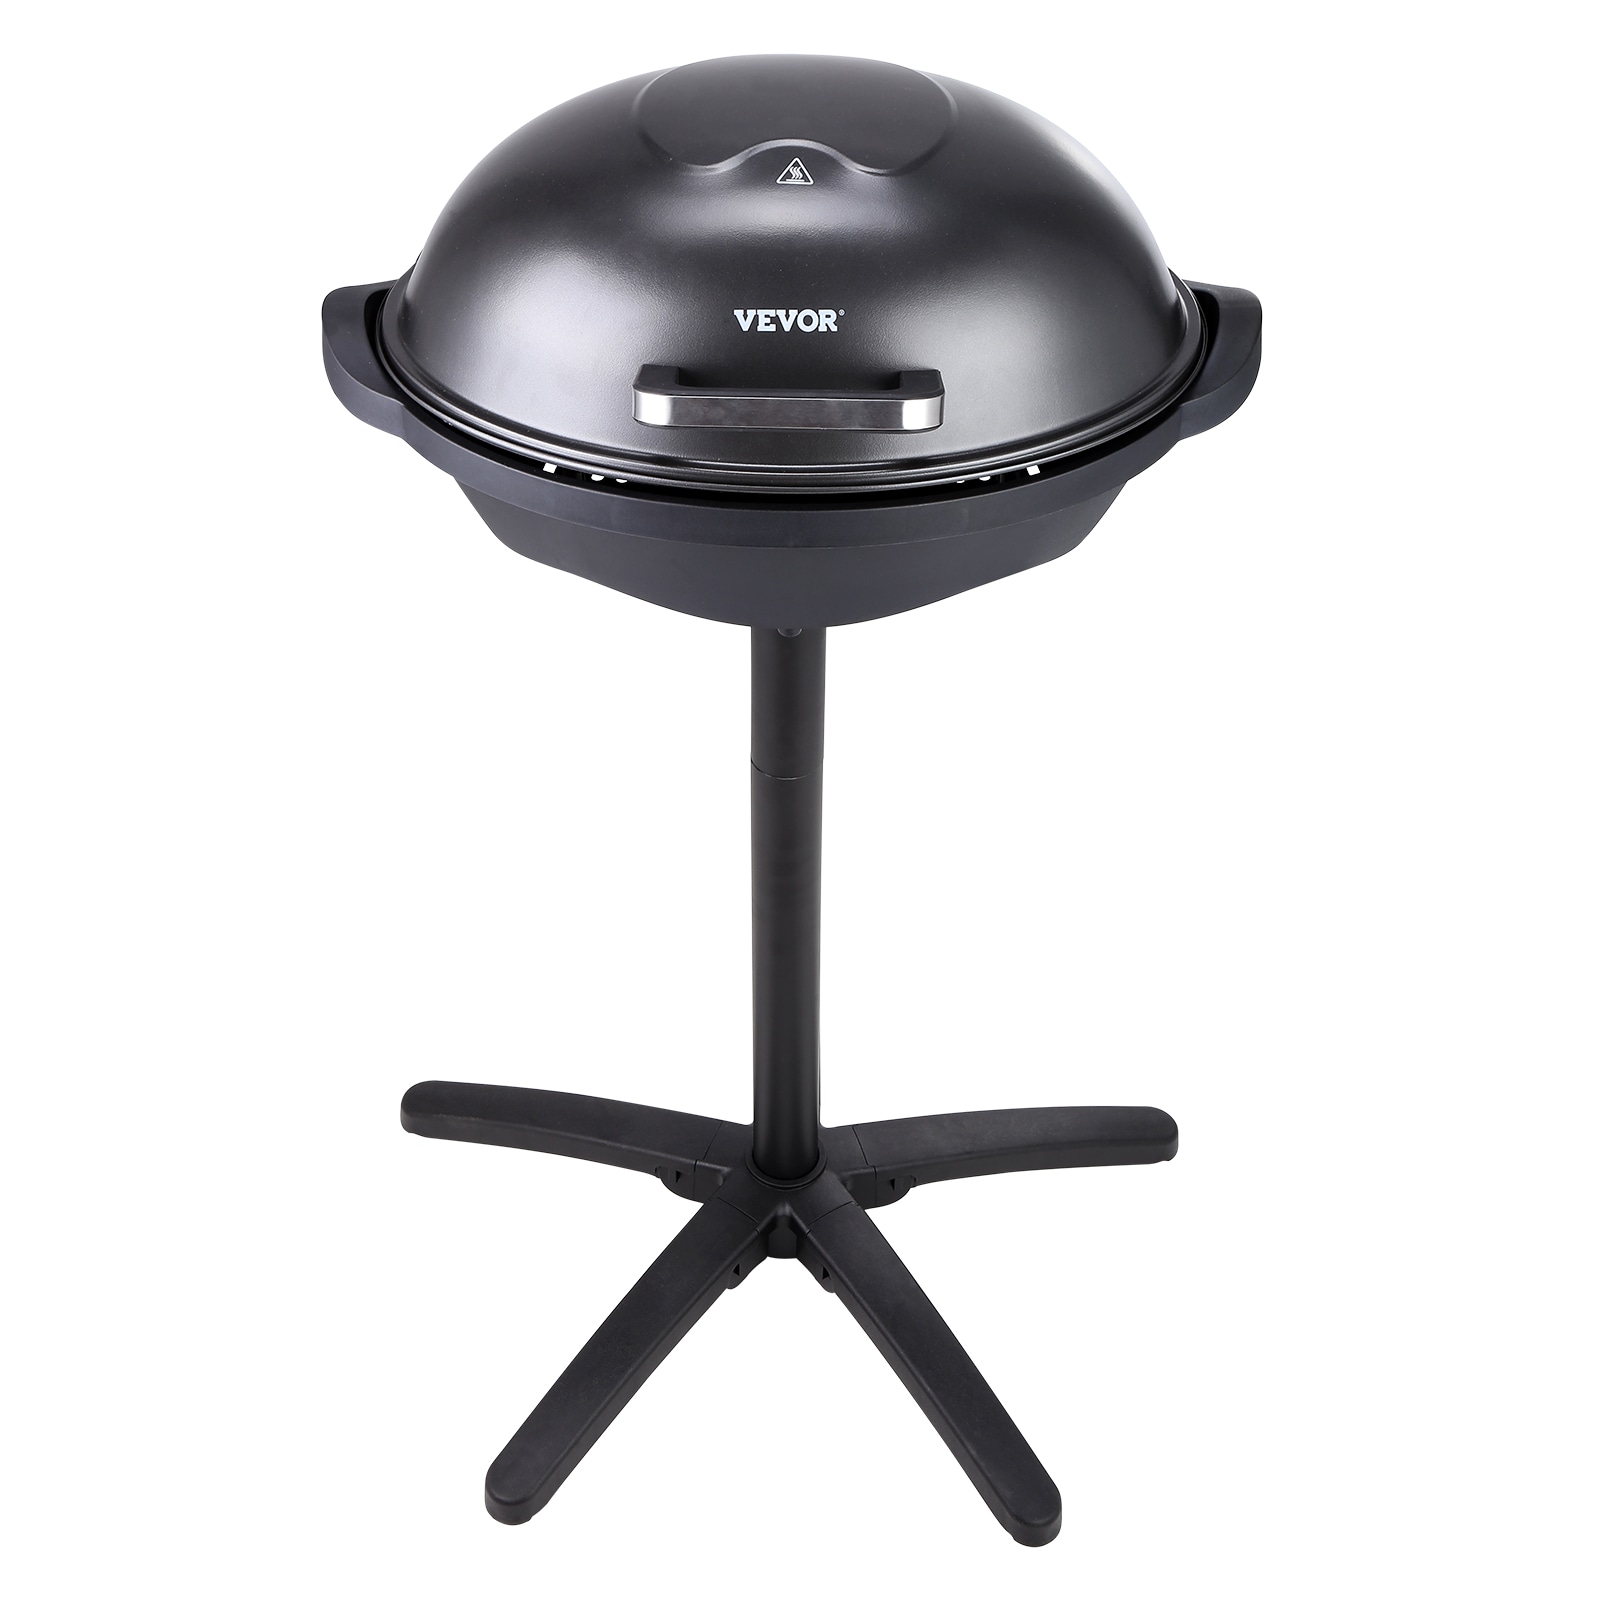 VEVOR Smokeless Electric Grills 110 sq. in. Electric BBQ Grill